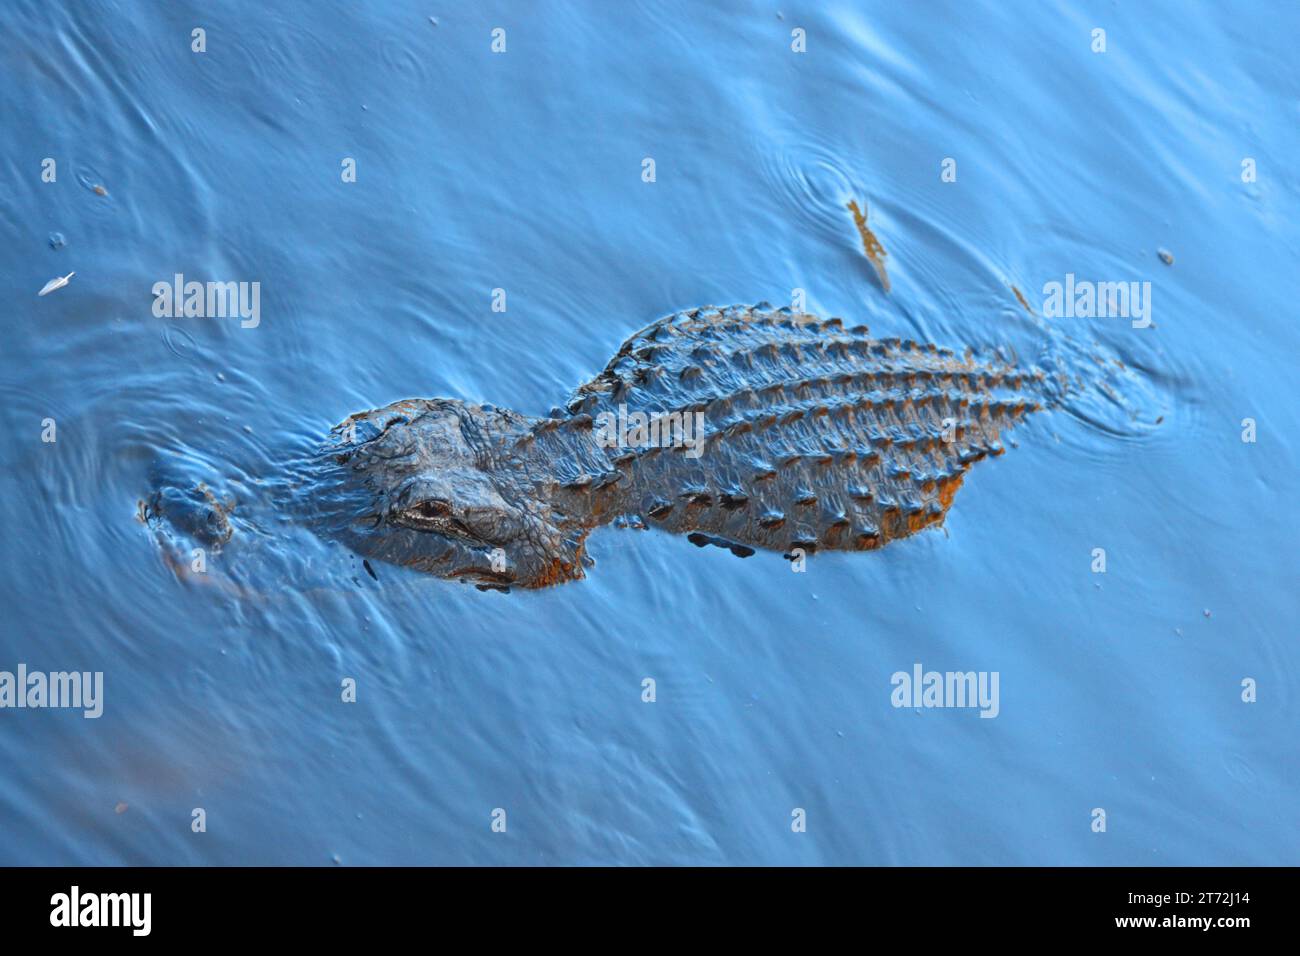 Alligator in blue water Stock Photo